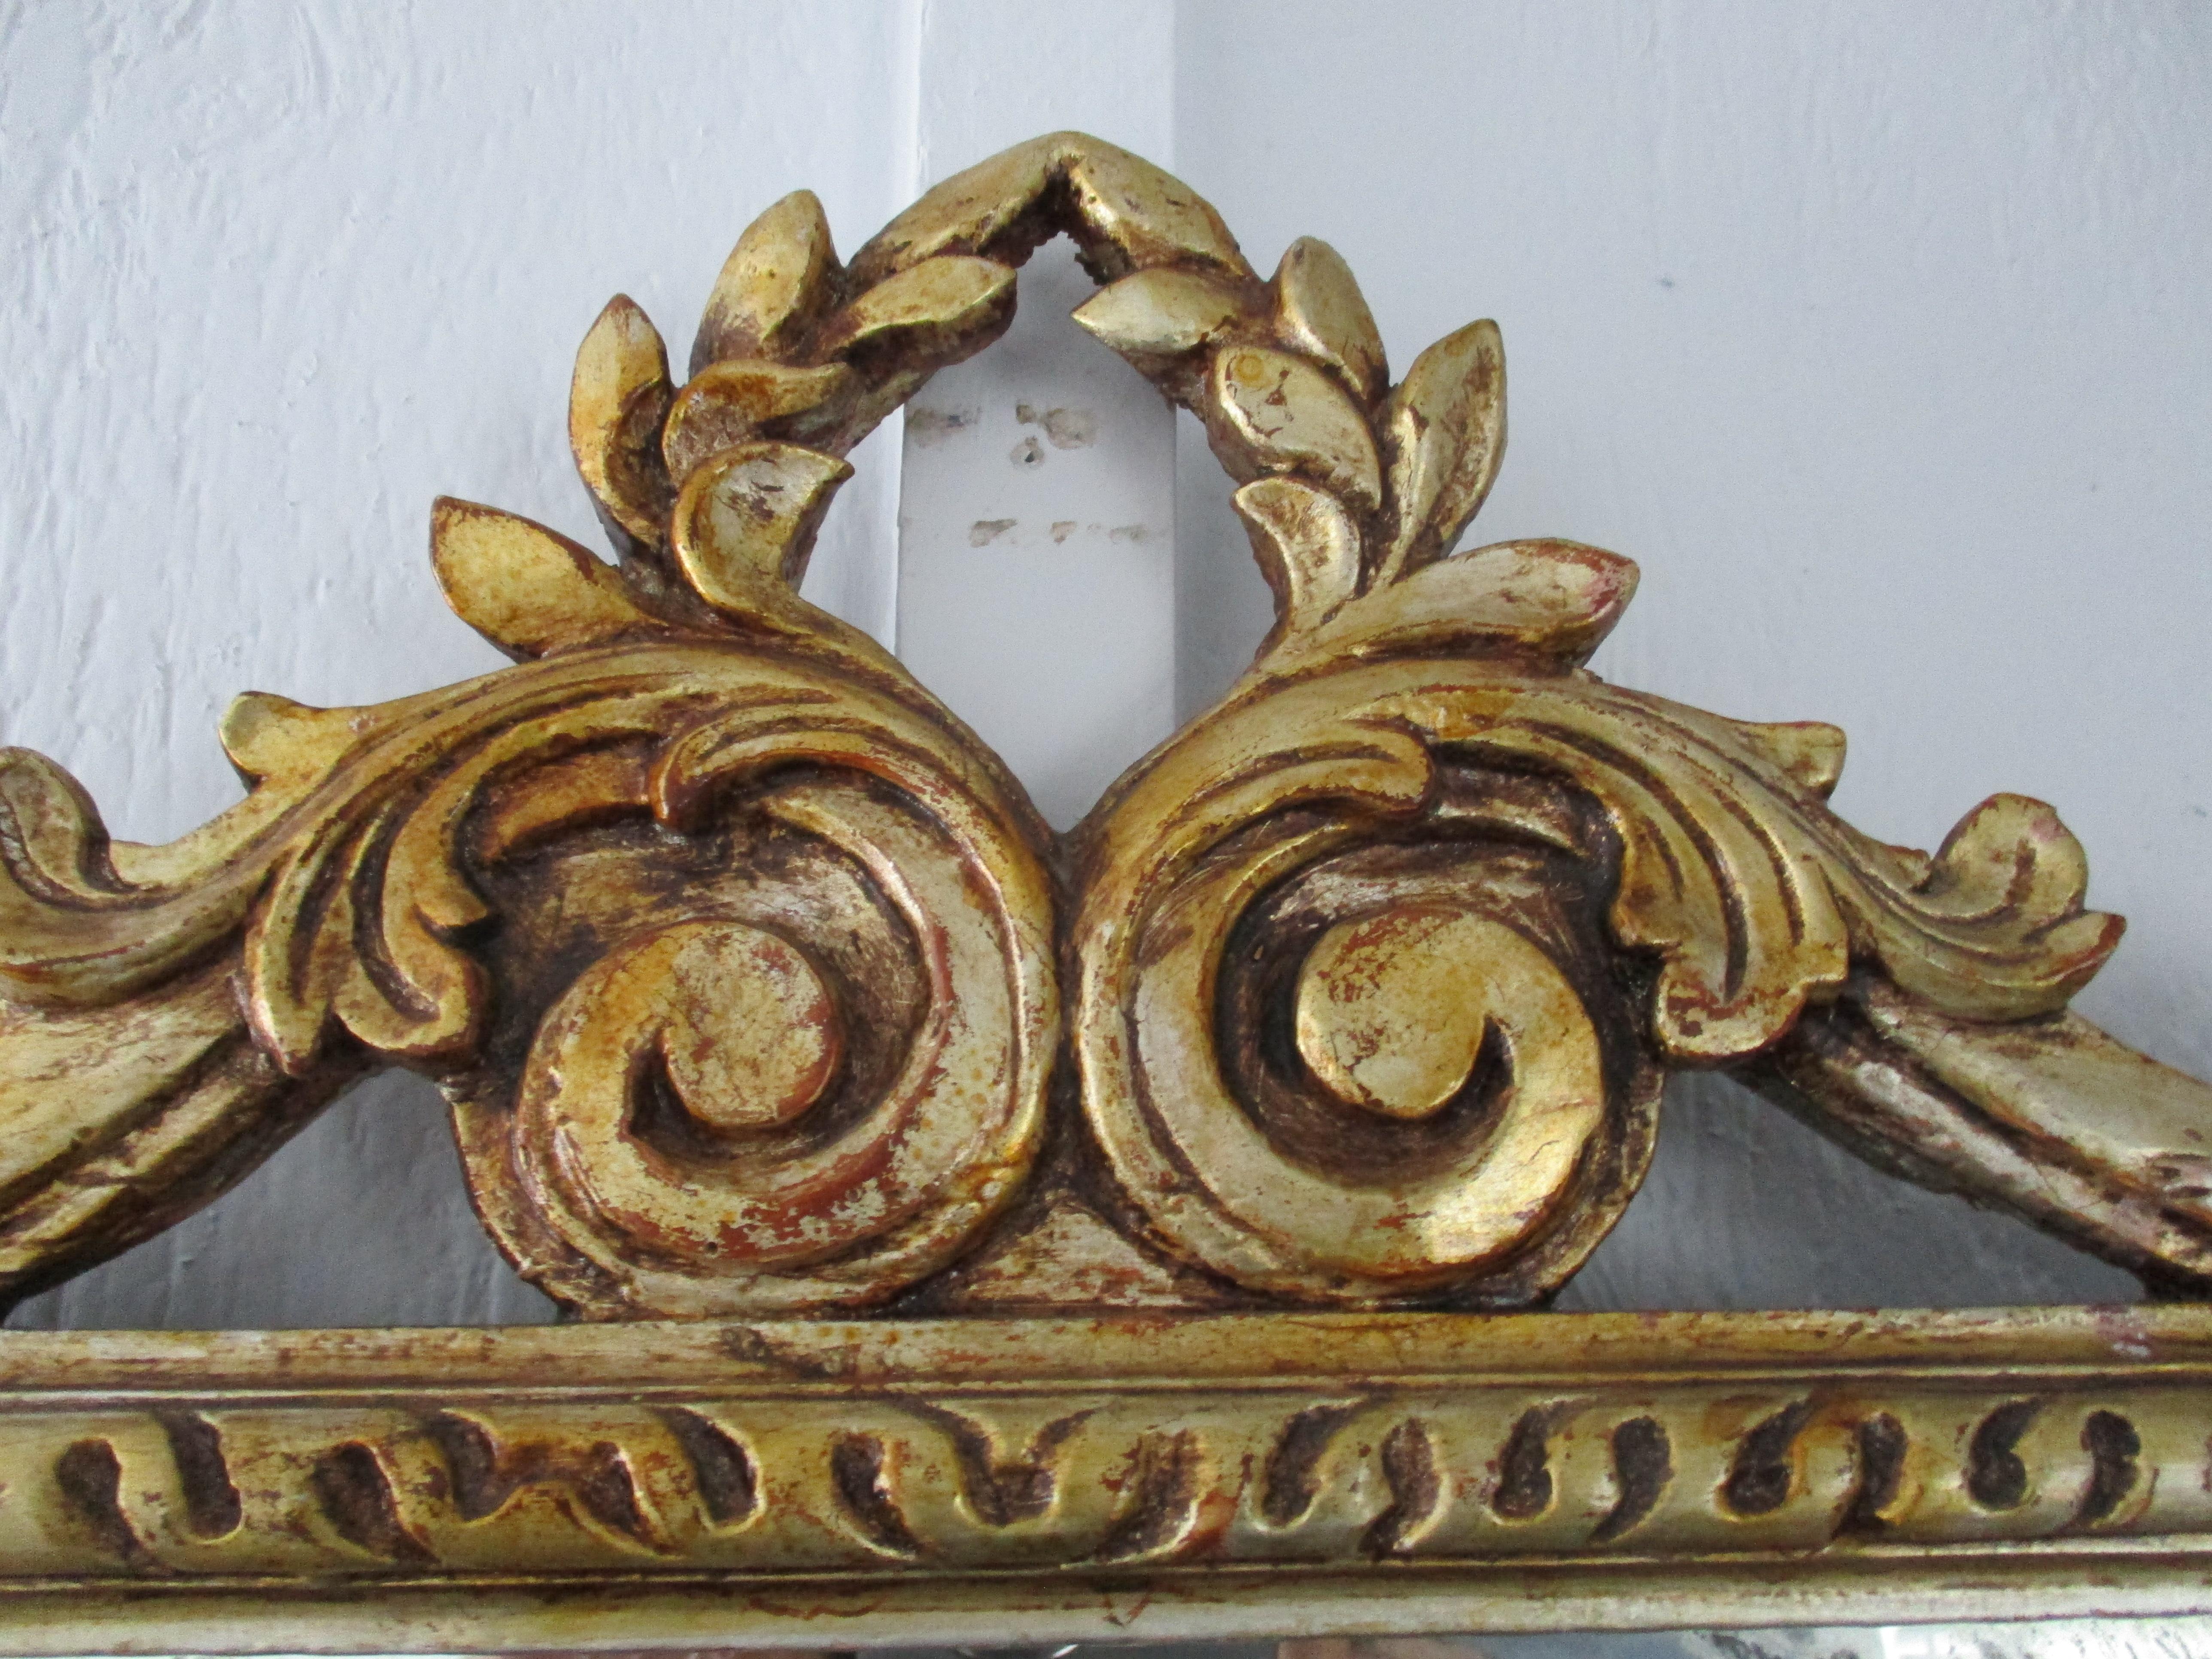 Beautiful French tri-panel carved giltwood console mirror with original mercury glass. This mirror can sit on a console, mantel, etc. or be hung.